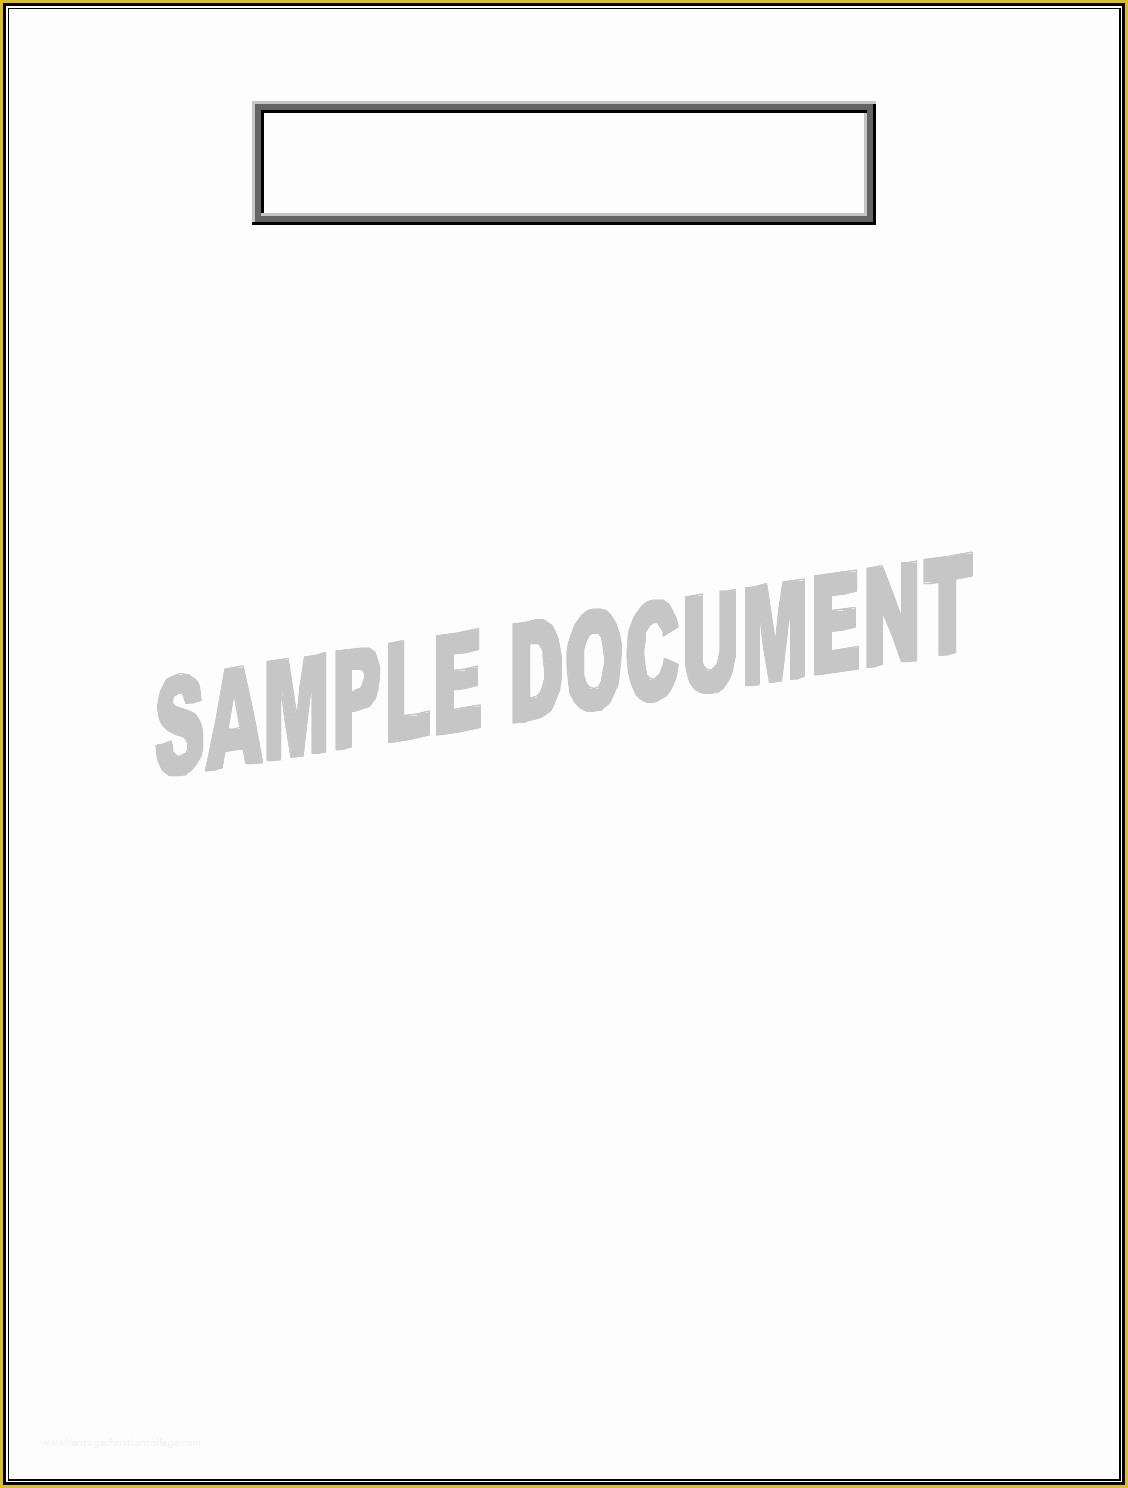 Free Nevada Will Template Of Download Nevada Last Will and Testament form for Free